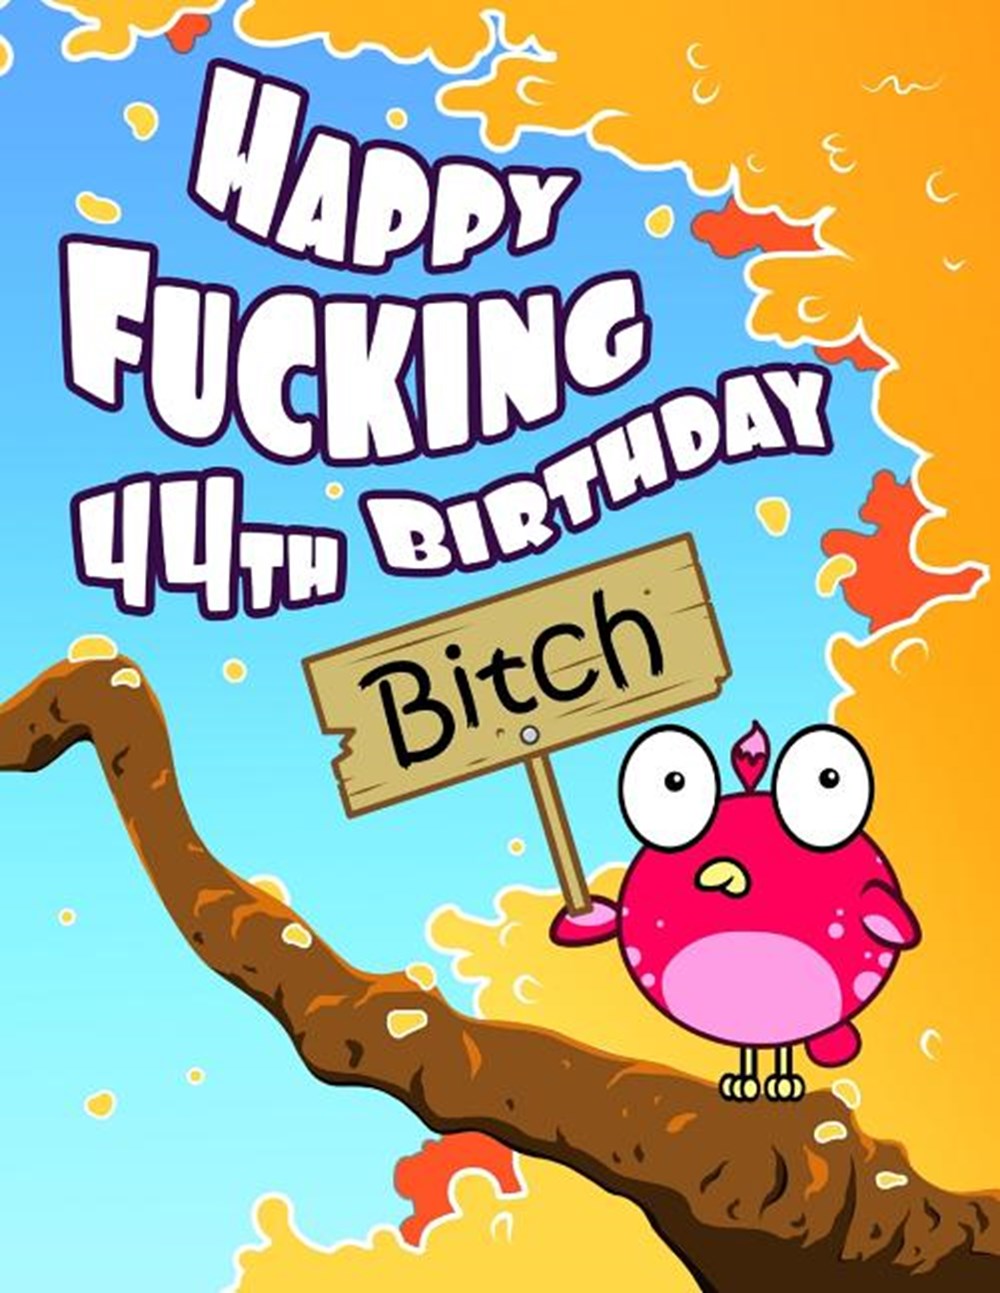 Happy Fucking 44th Birthday Bitch: Sweet Sprinkled with Sassy...Forget the Funny Birthday Card and G